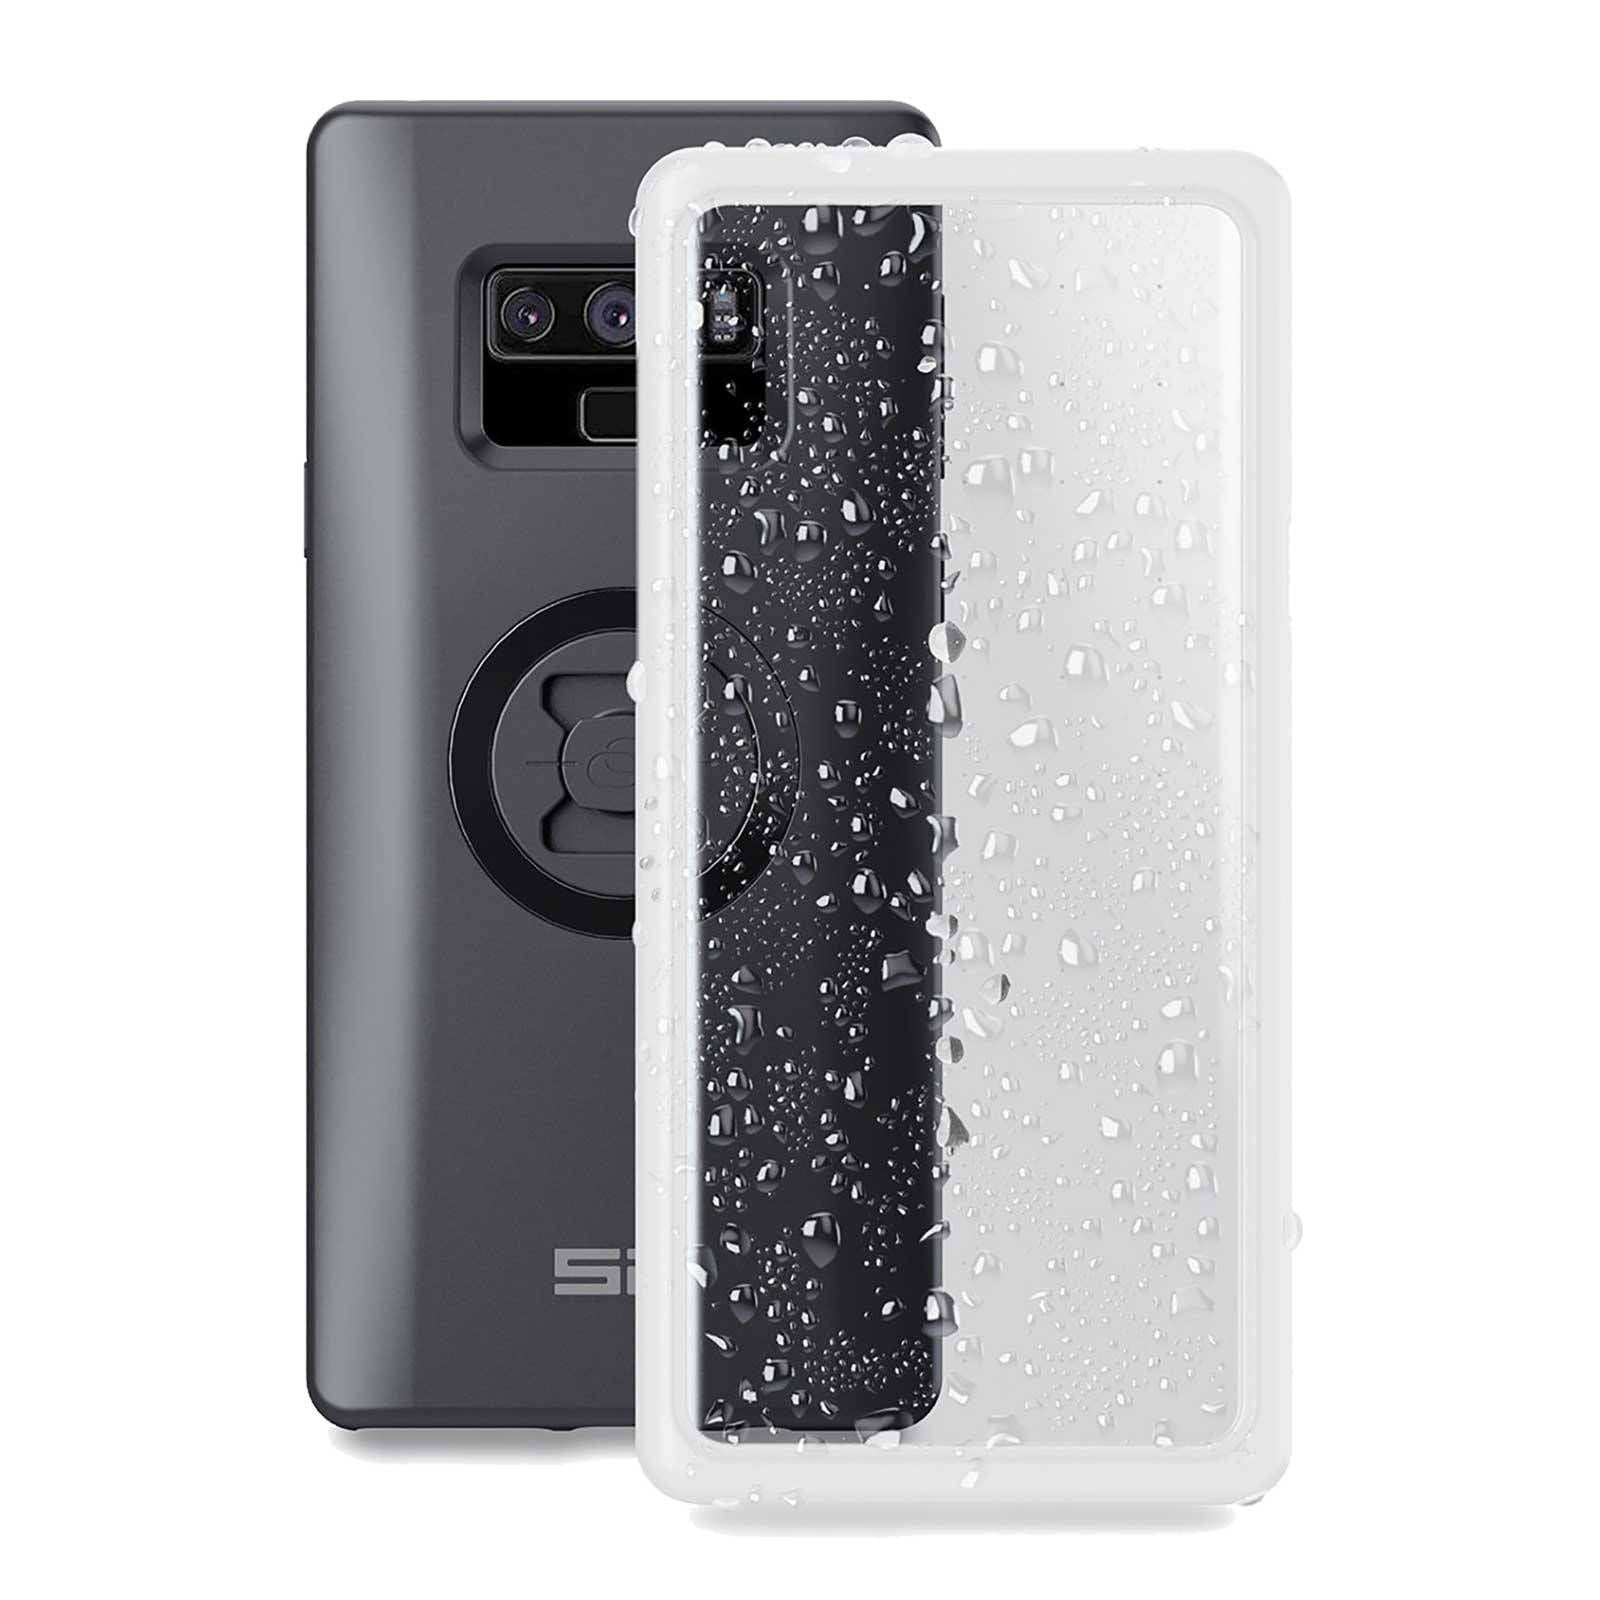 New SP CONNECT WEATHER COVER SAMSUNG GALAXY NOTE9 SPC55217